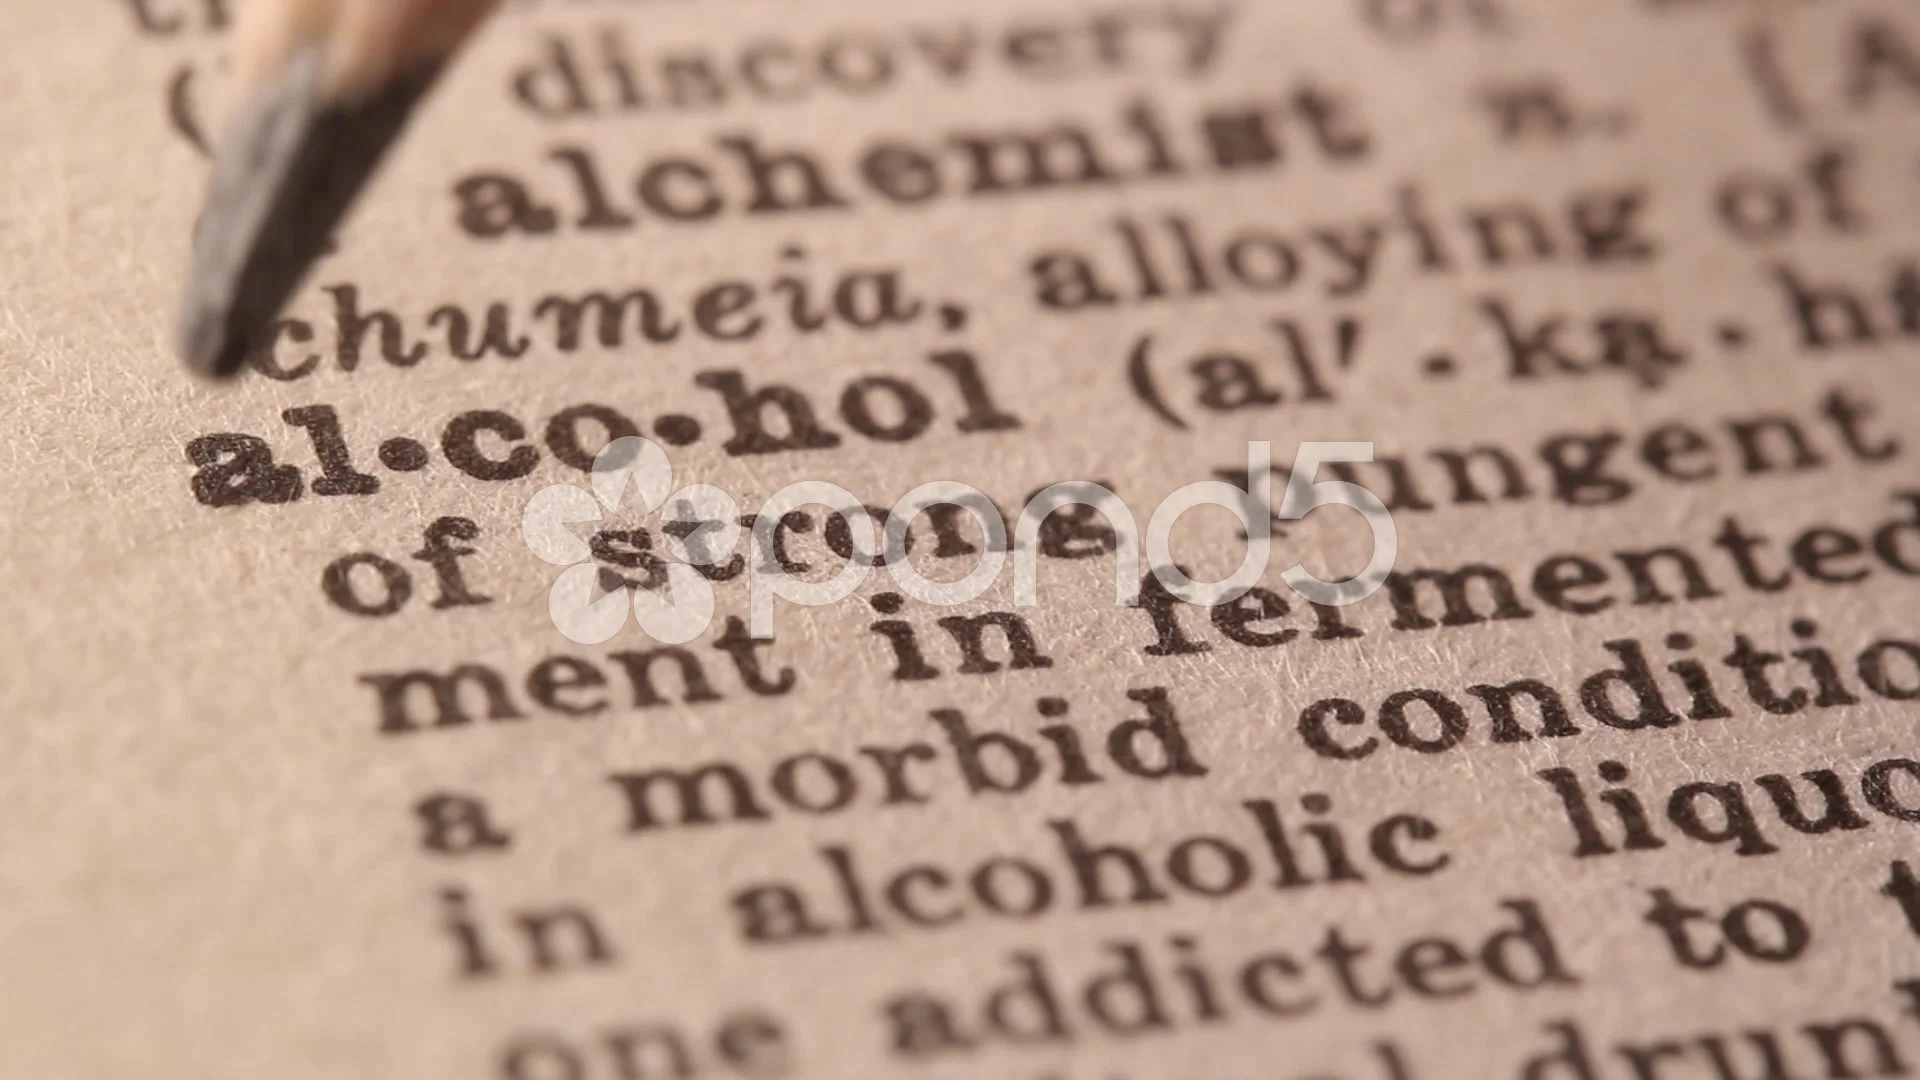 alcohol - fake dictionary definition of the word with pencil